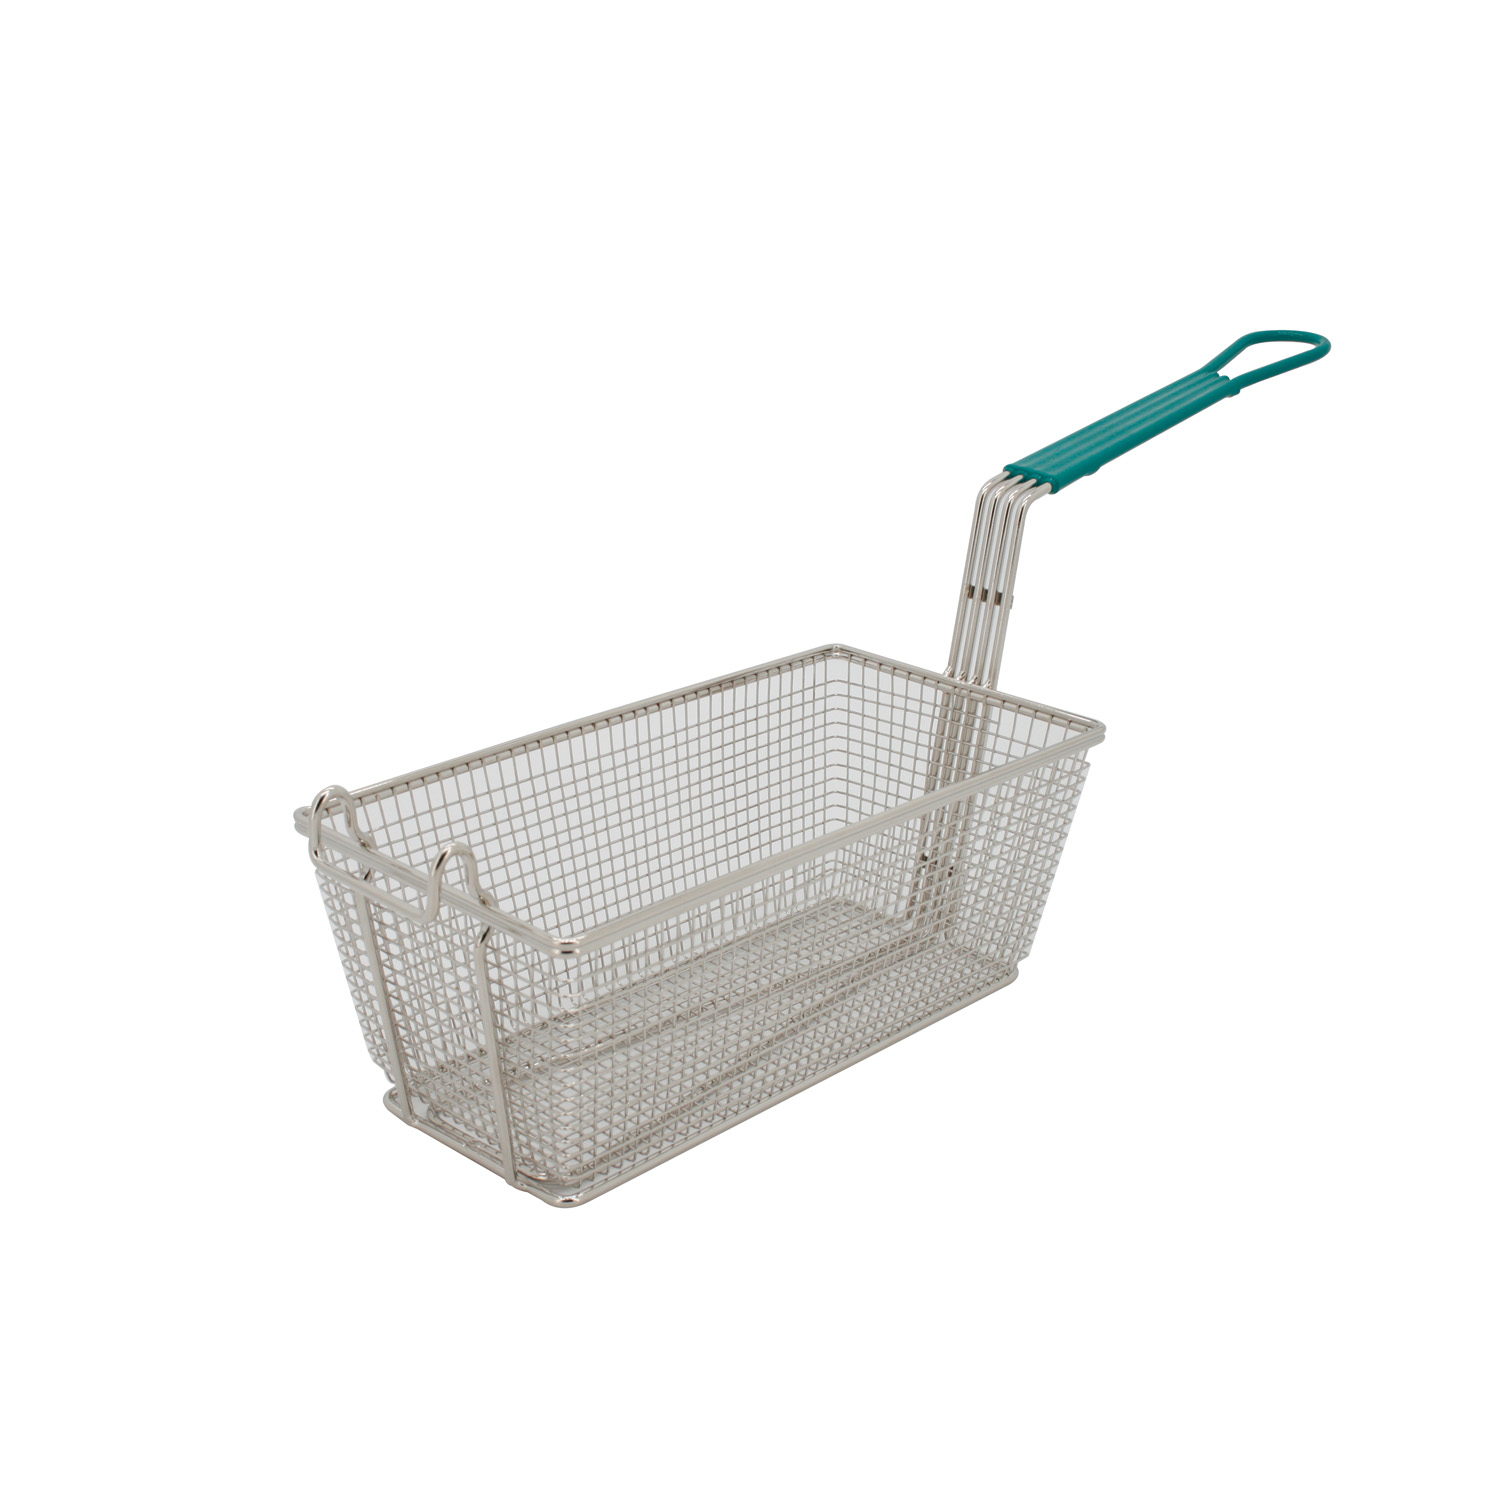 CAC China SPFB-5 Nickel-Plated Fry Basket with Green Handle 13" x 6-3/4" x 5-1/8"